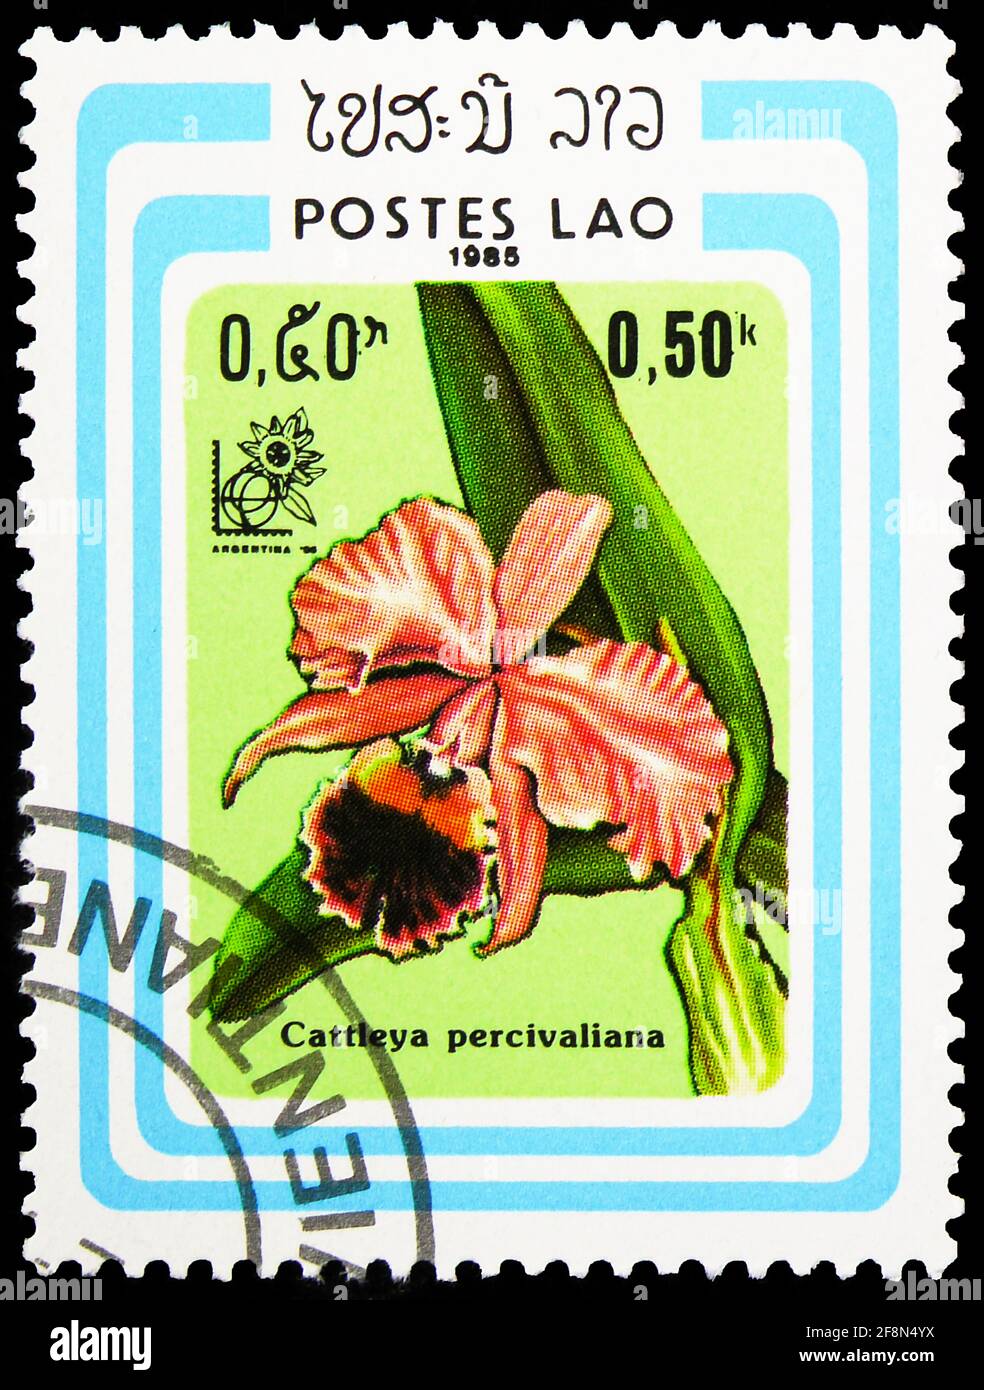 MOSCOW, RUSSIA - SEPTEMBER 30, 2019: Postage stamp printed in Laos shows Cattleya percivaliana, International Stamp Exhibition Argentina 1985 serie, c Stock Photo